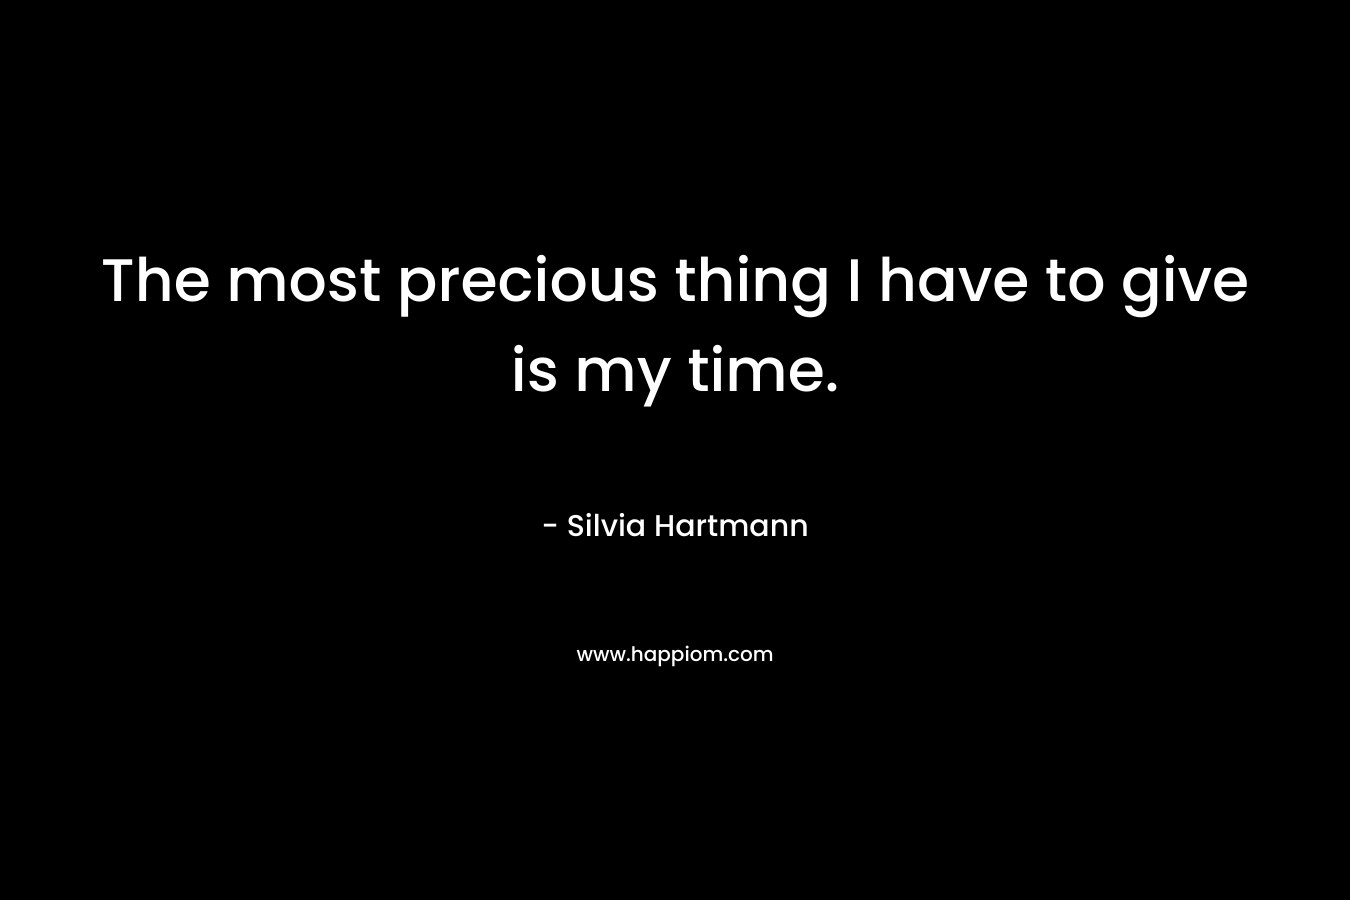 The most precious thing I have to give is my time.